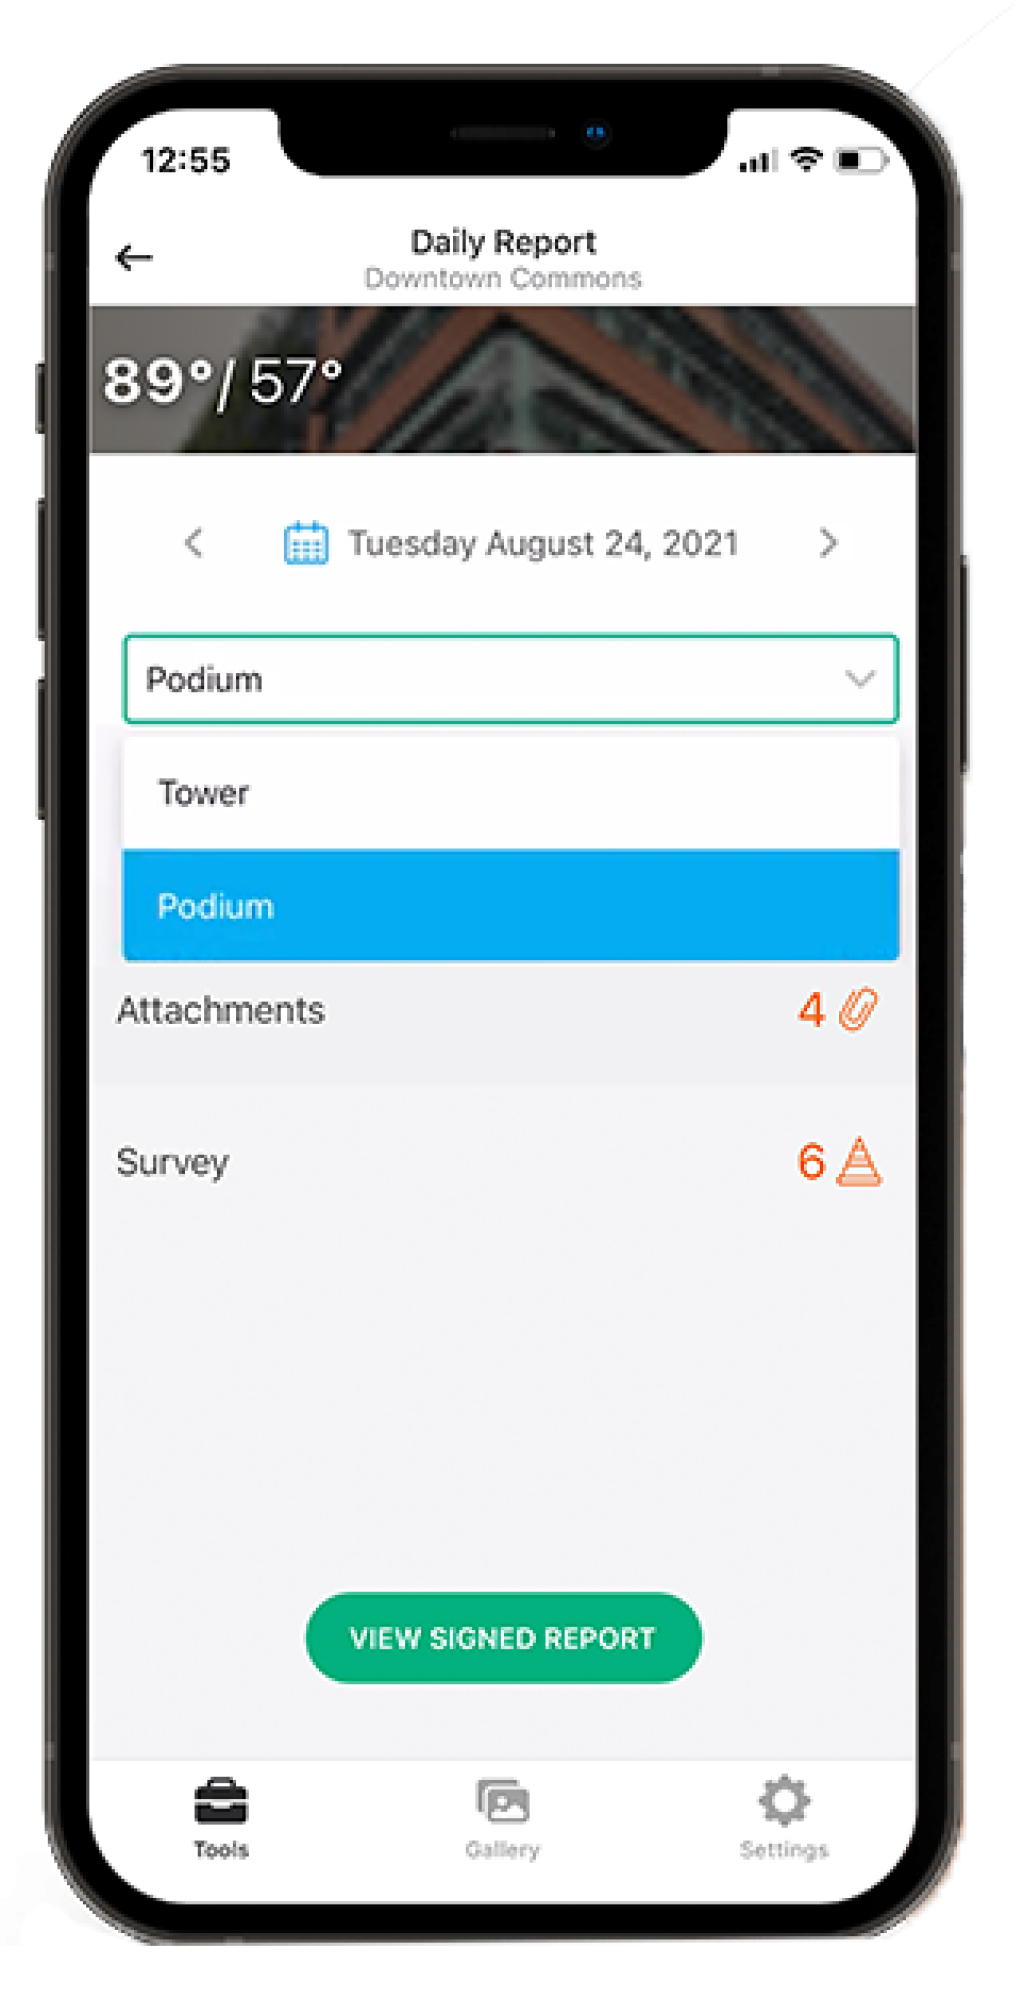 segmented daily reports in construction report app.